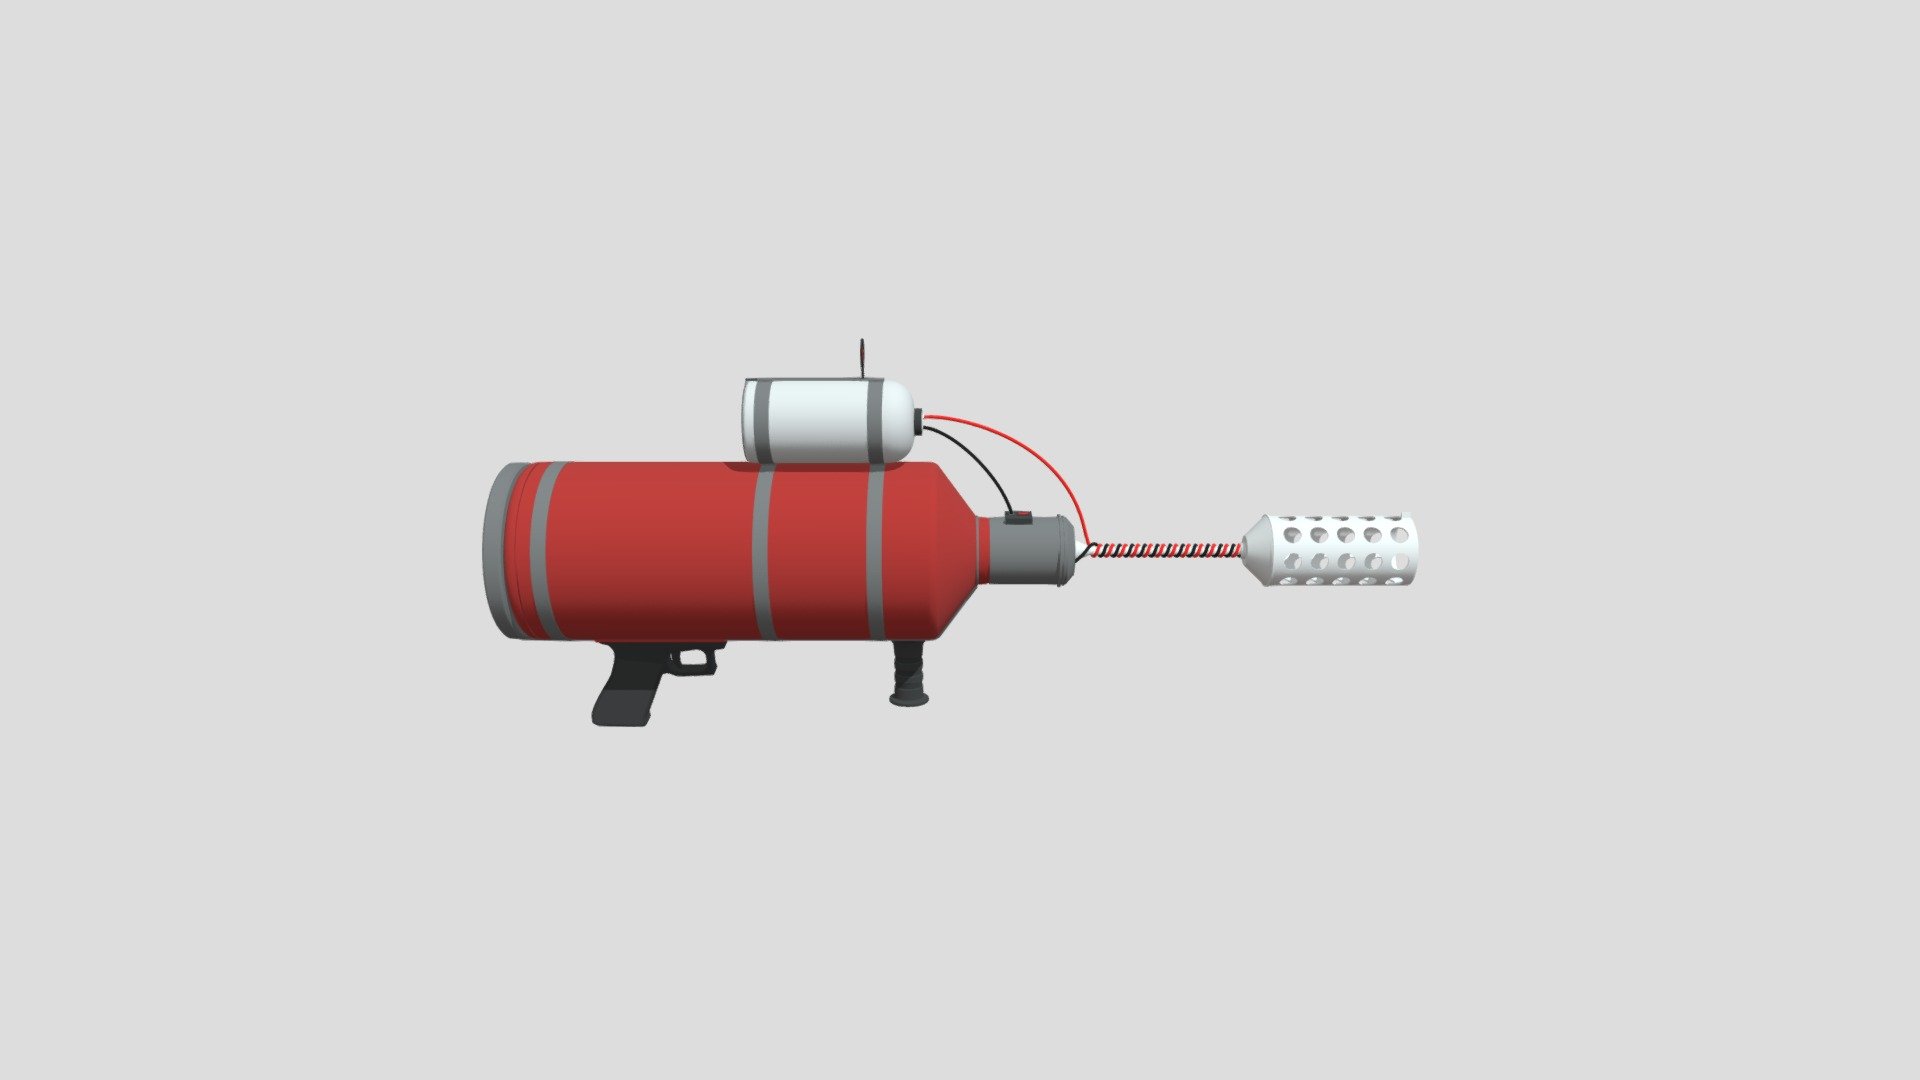 A cartoonish, medium poly flamethrower prop perfect for animated projects. Modelled in Blender 2.8. Most texures are procedural shaders generated within Blender 3d model